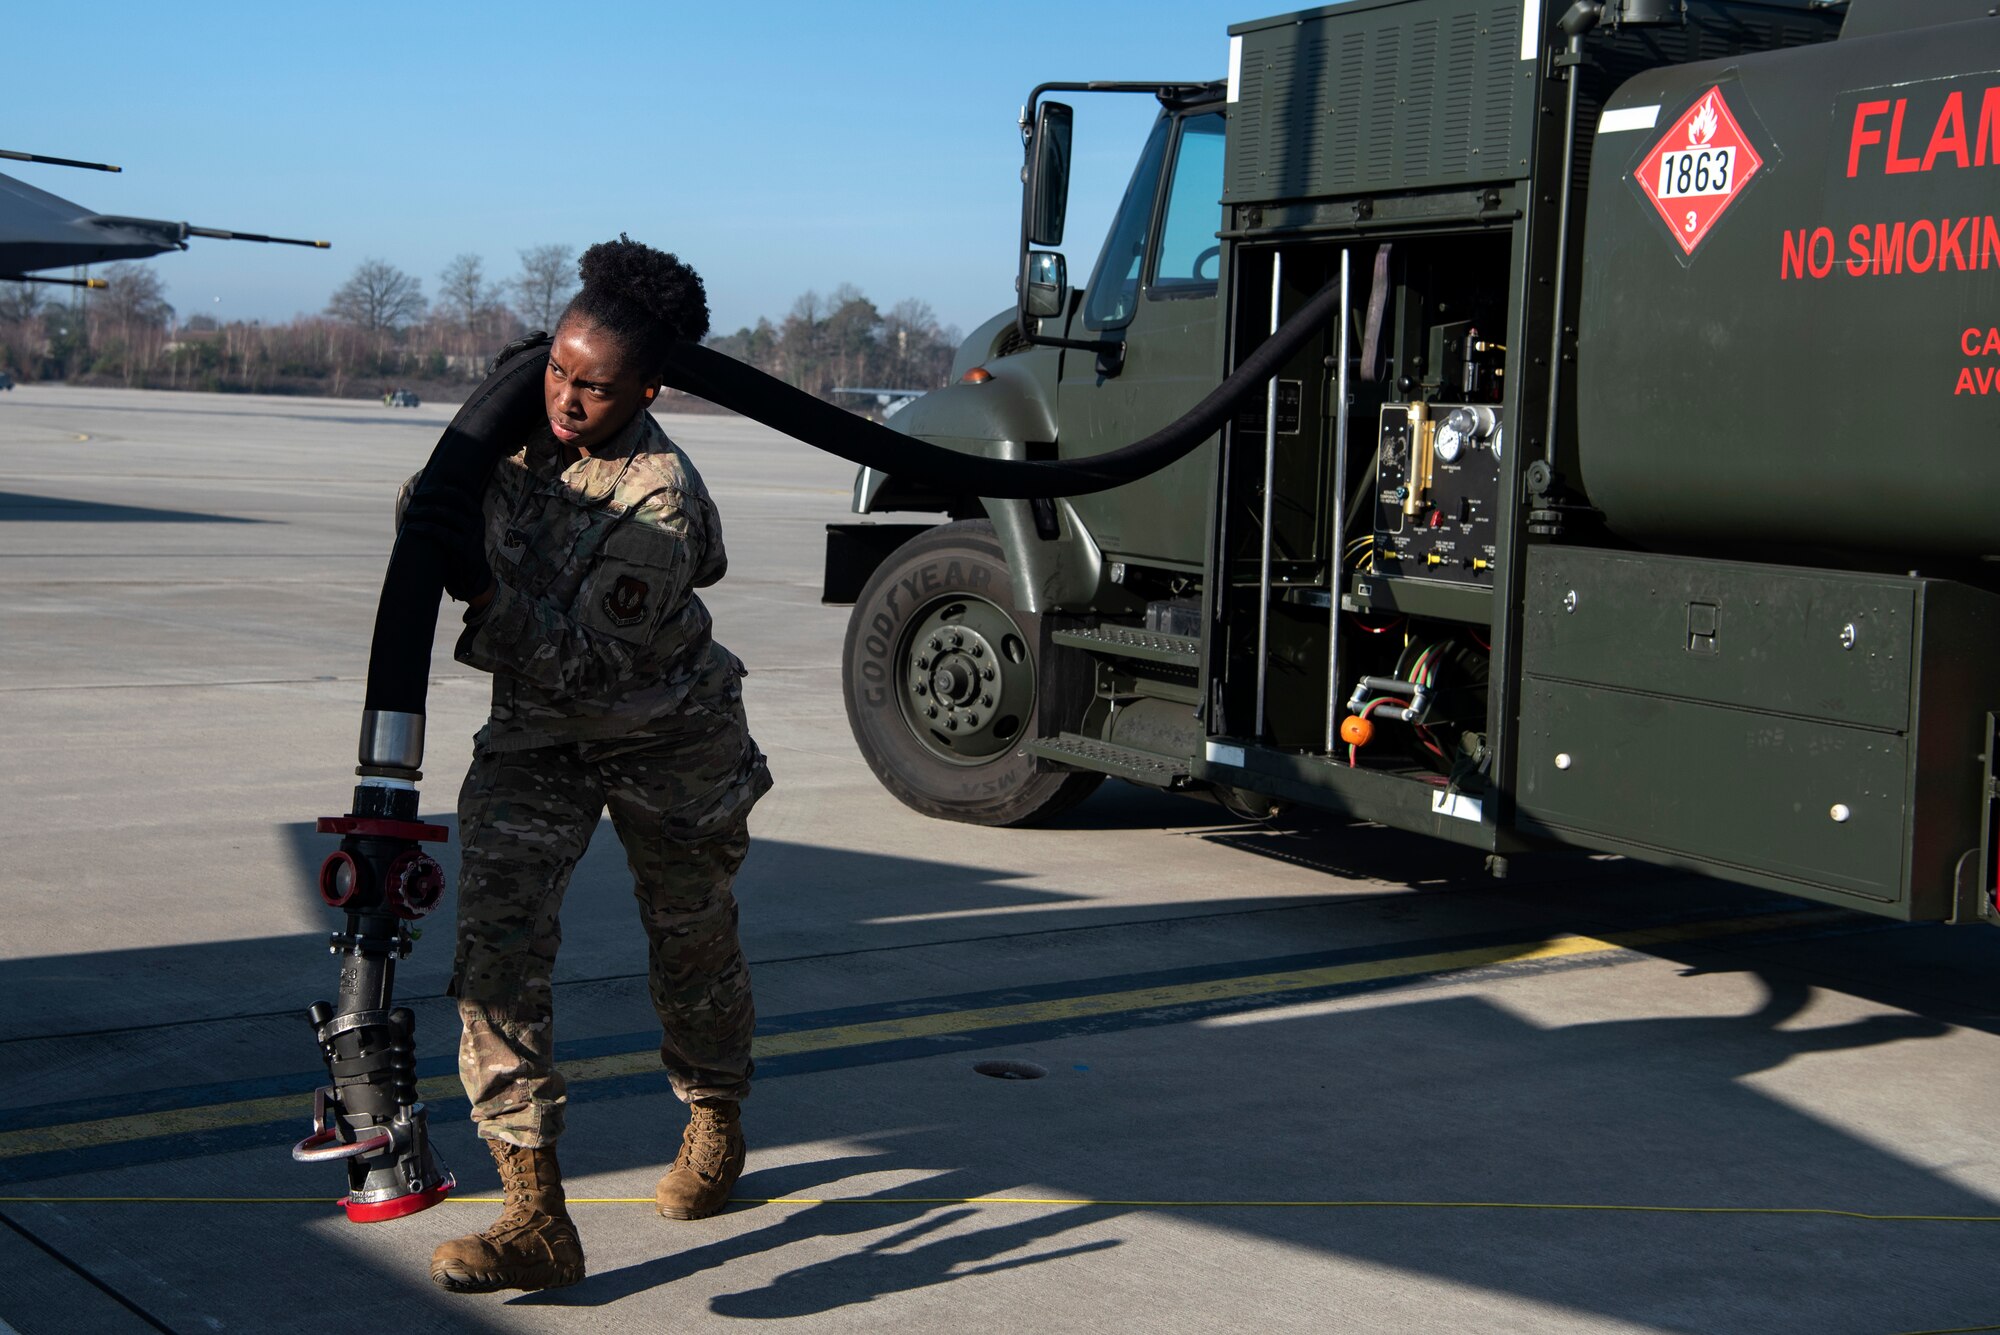 U.S. Air Force Senior Airman Aaliyah Tucker, 52nd Logistics Readiness Squadron fuels facilities operator, carries a fuel hose on the flightline at Ramstein Air Base, Germany, Jan. 22, 2020. Tucker participated in an Agile Combat Employment exercise to ensure wing readiness and deter aggressors. A small team of 52nd Fighter Wing Airmen shipped cargo, loaded munitions, and refueled F-16 Fighting Falcons while participating in the exercise. (U.S. Air Force photo by Airman 1st Class Valerie Seelye)